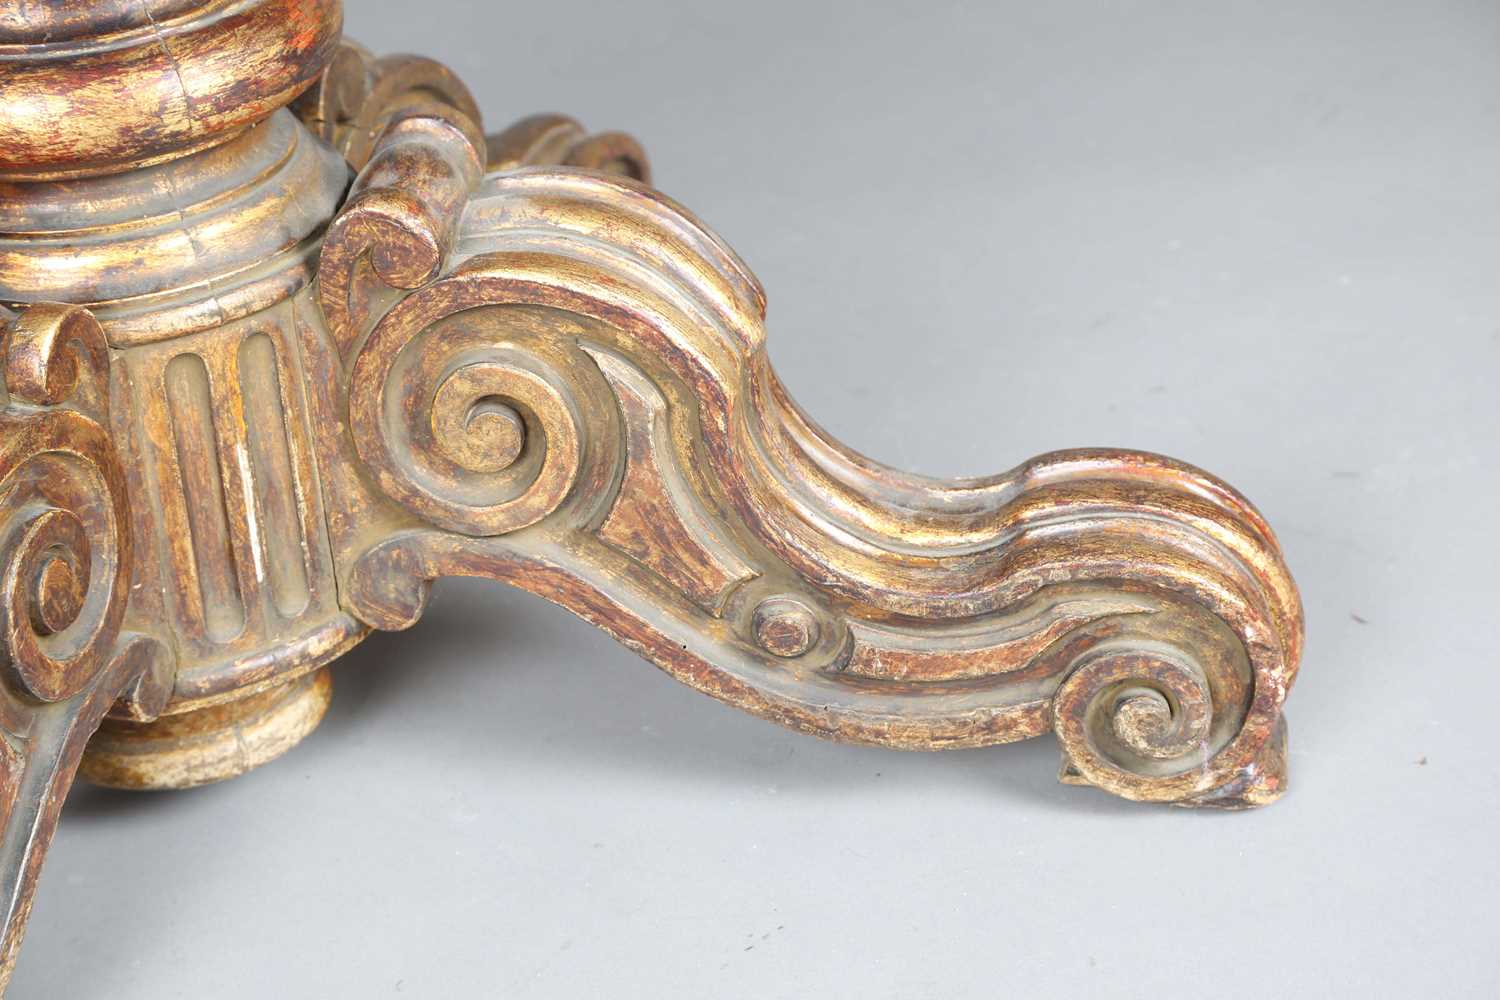 A 19th century giltwood table base with a later removable top, the base carved with scrolling legs - Image 3 of 10